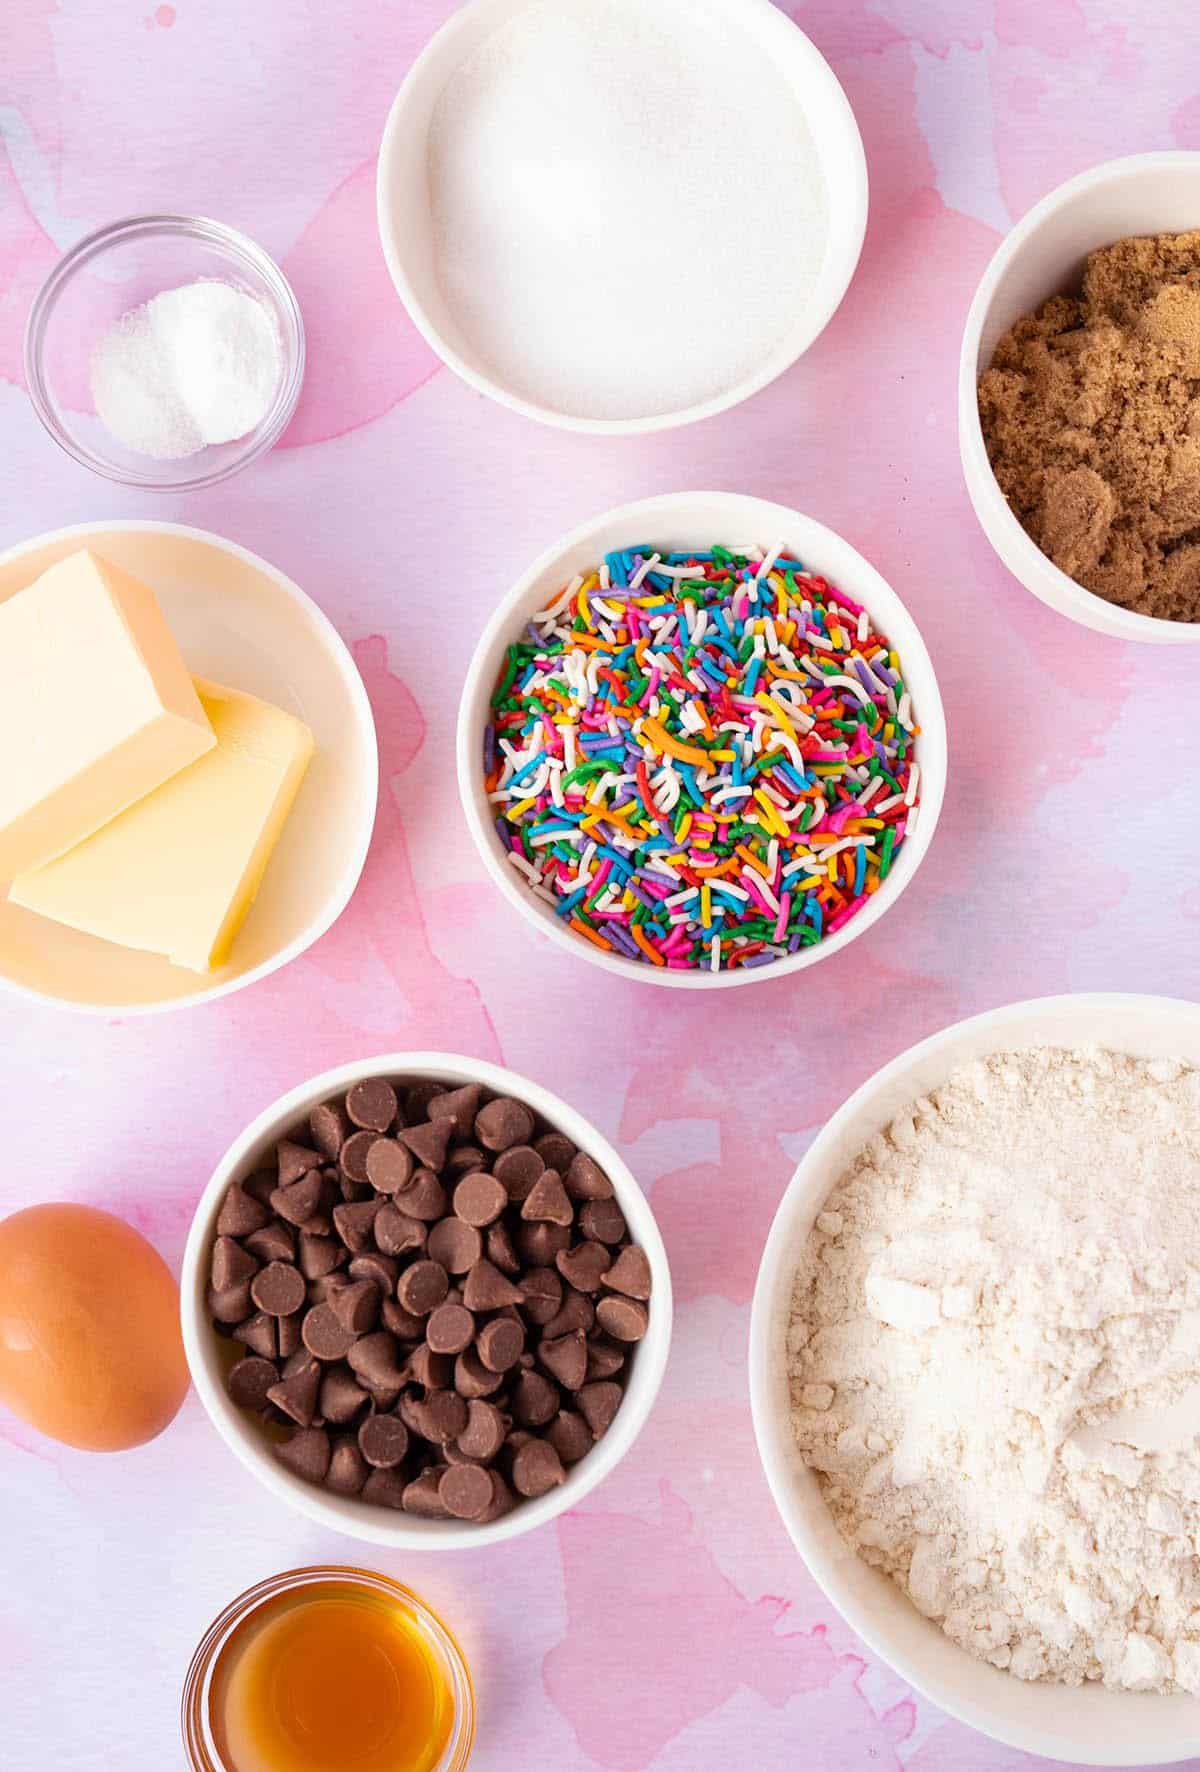 All the ingredients needed to make Funfetti Cookies laid out on a pink background. 